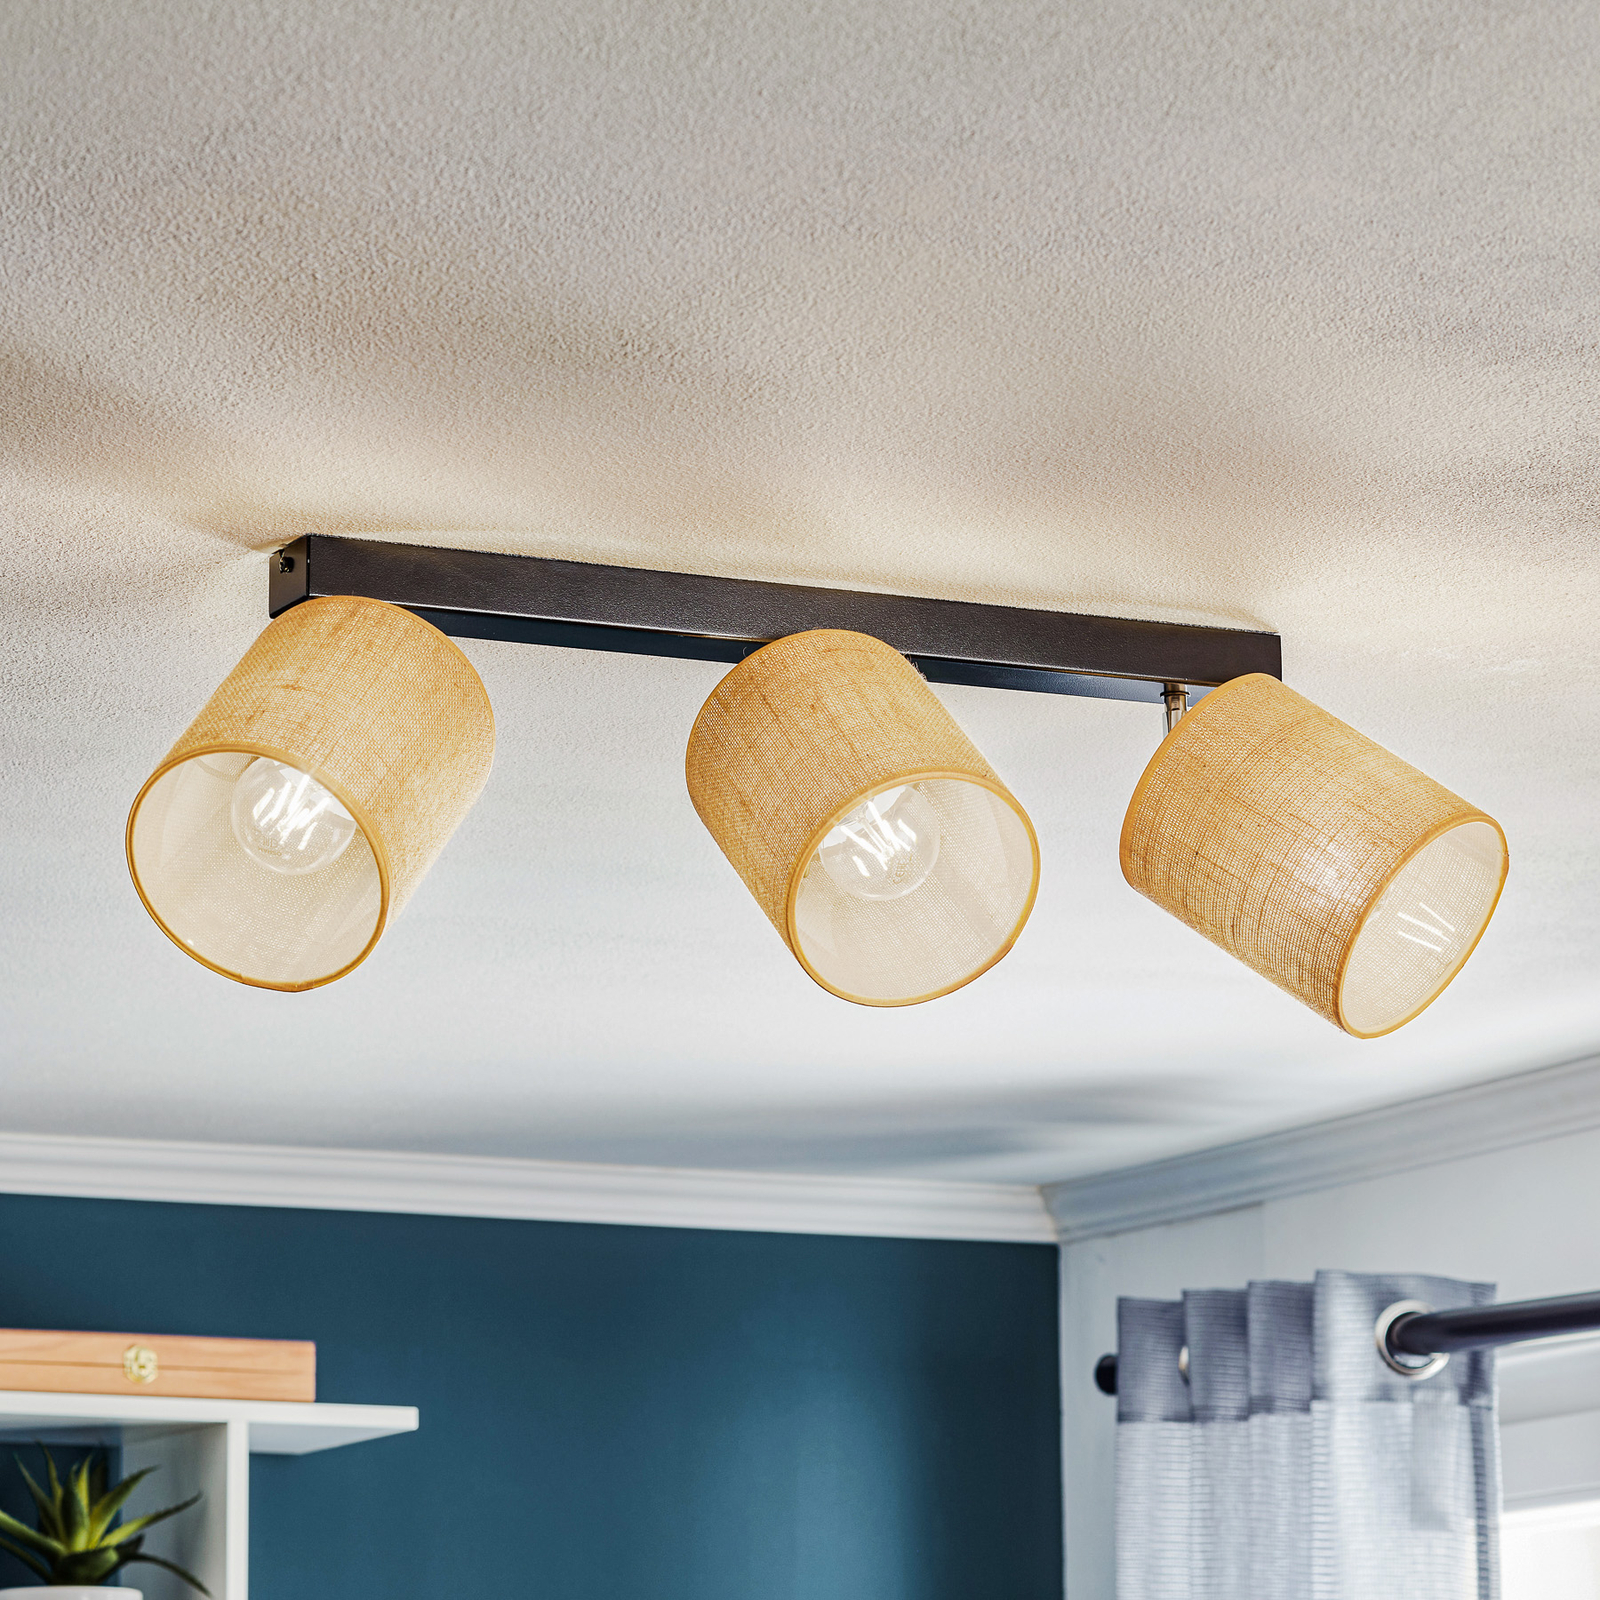 Jute ceiling light with three fabric lampshades